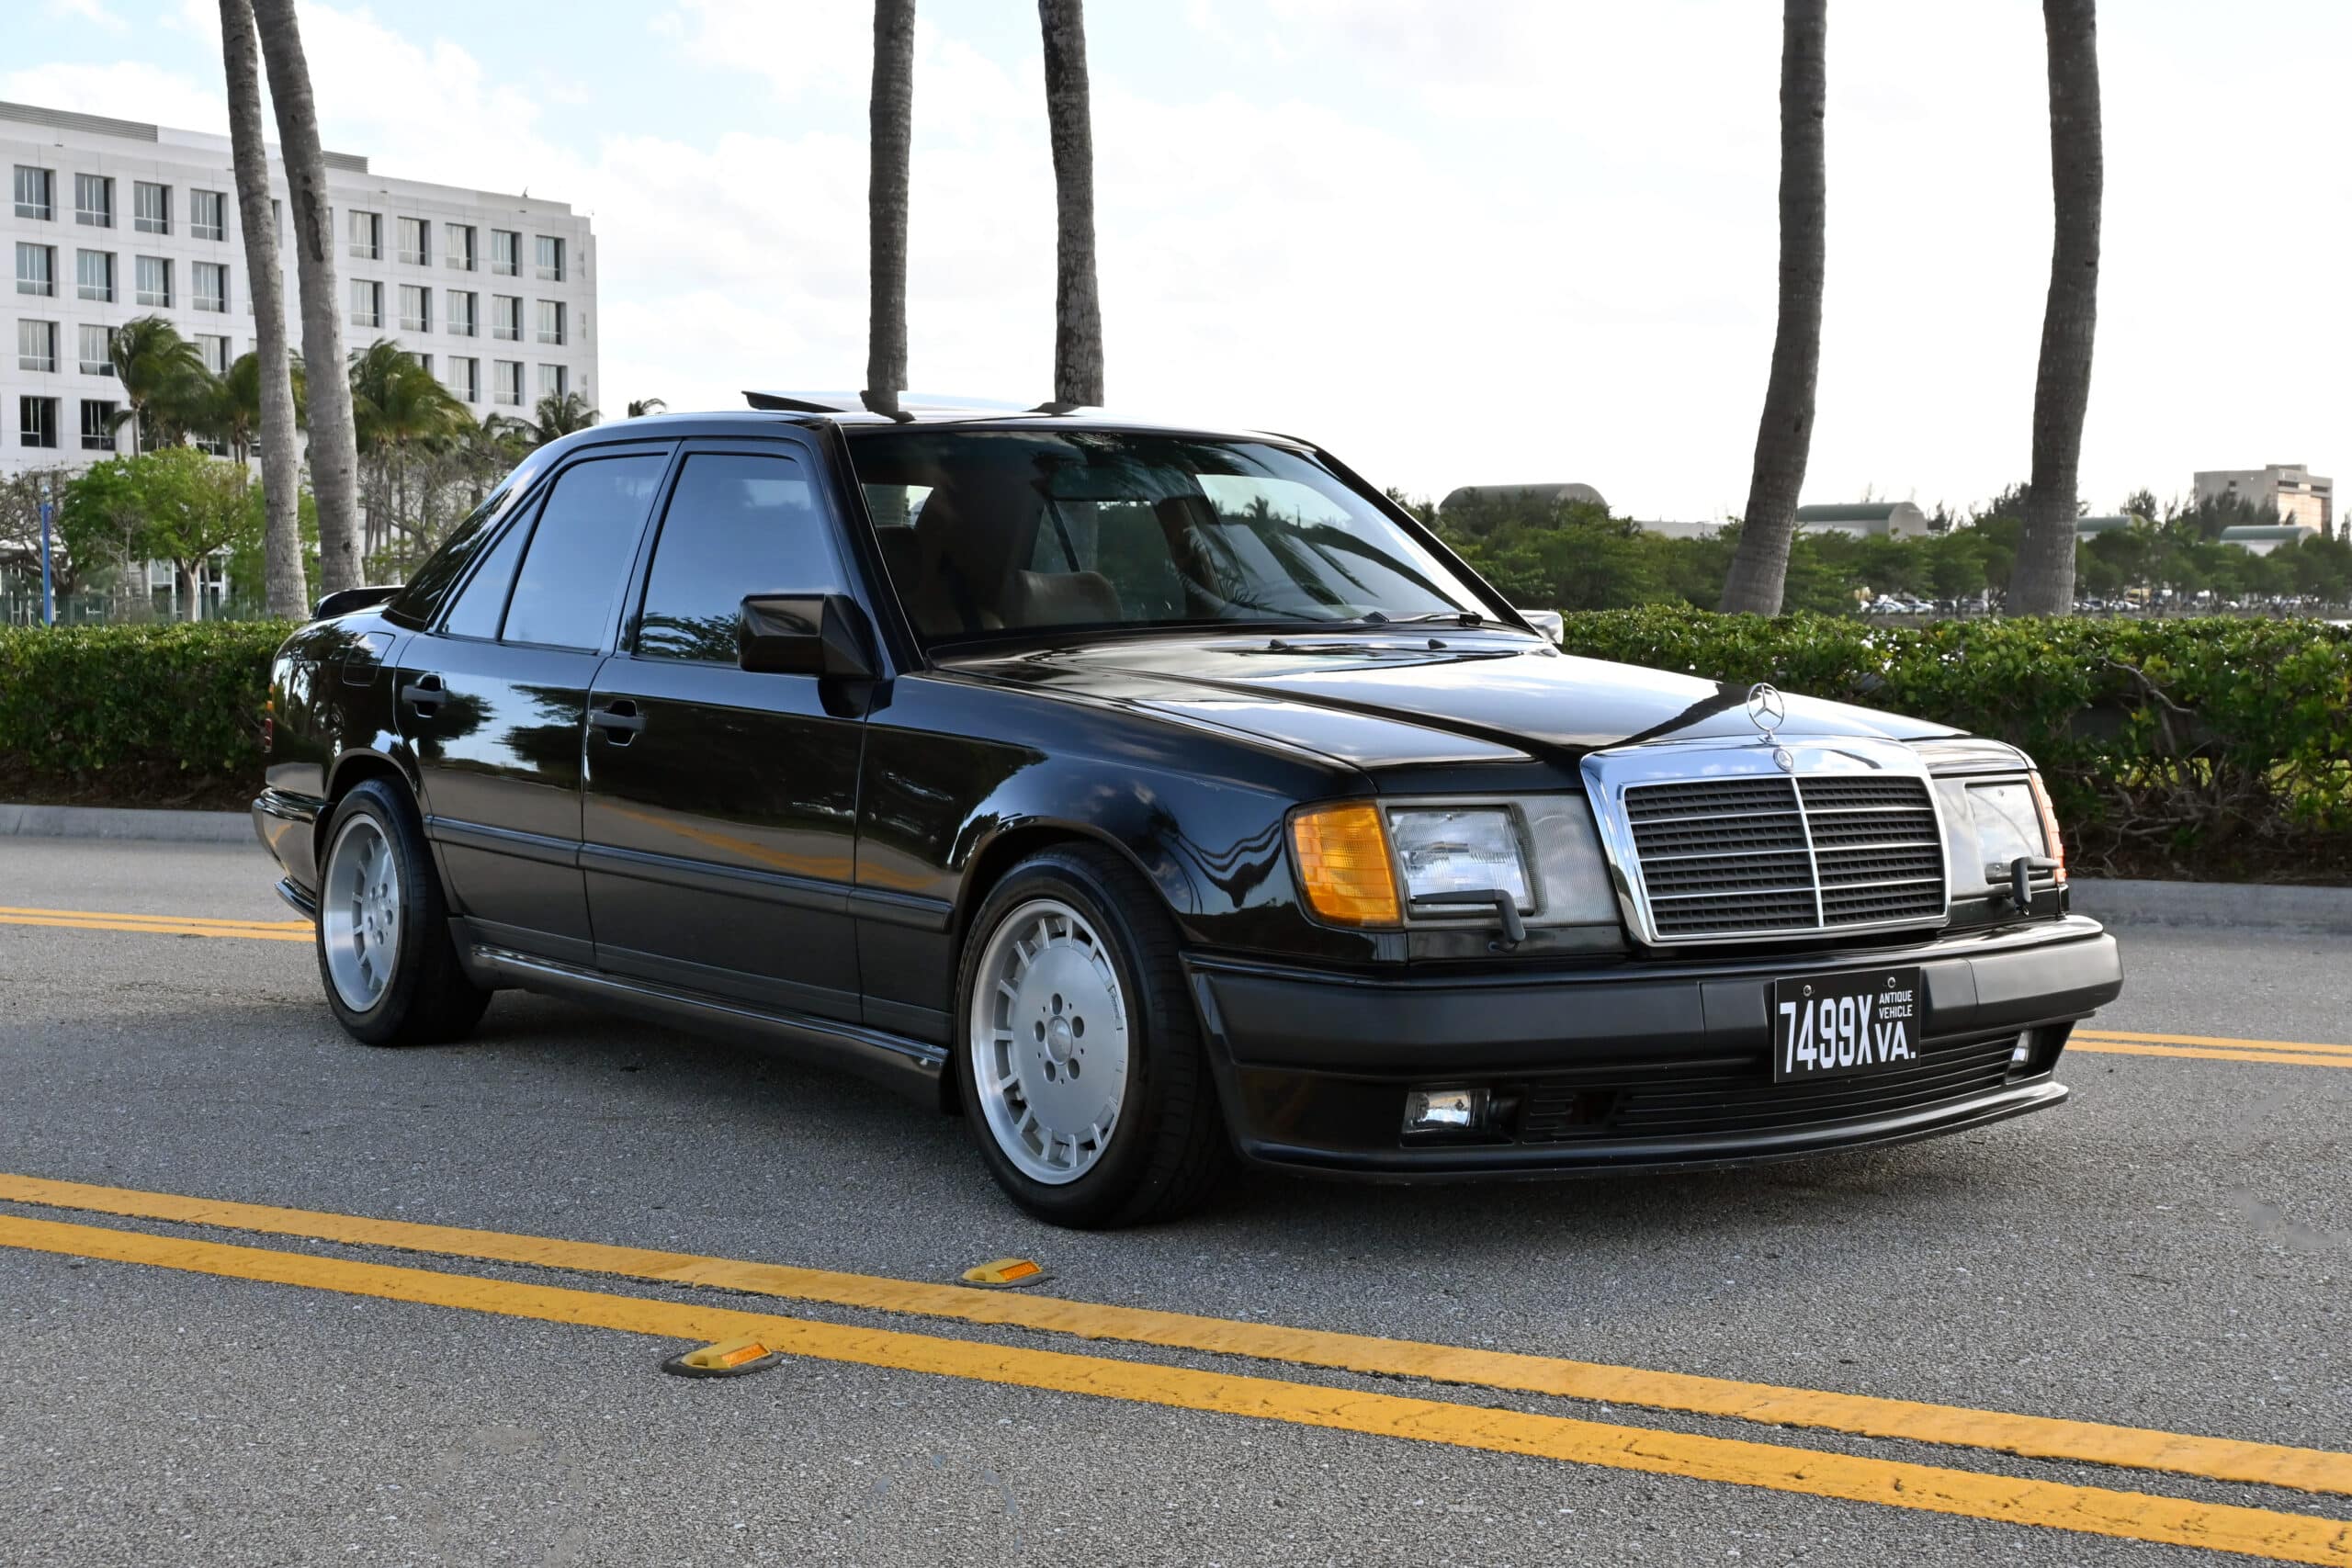 1986 Mercedes 300E, Rare factory 5-Speed manual, Lorinser Edition, well documented with service records